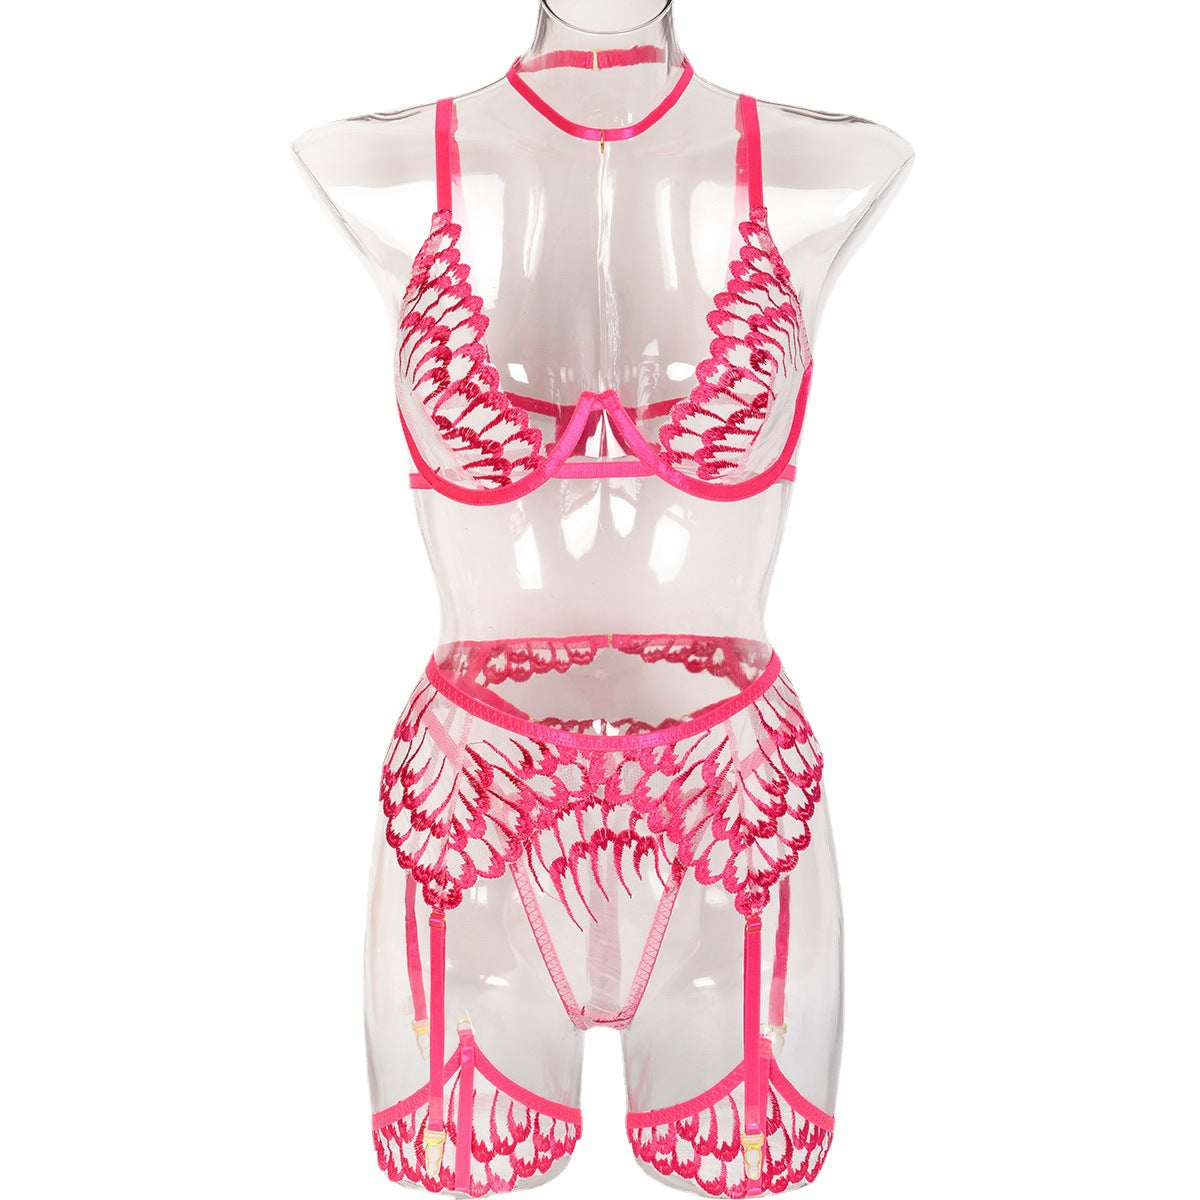 New Wings Embroidery Sexy Lingerie Set Hot Pink